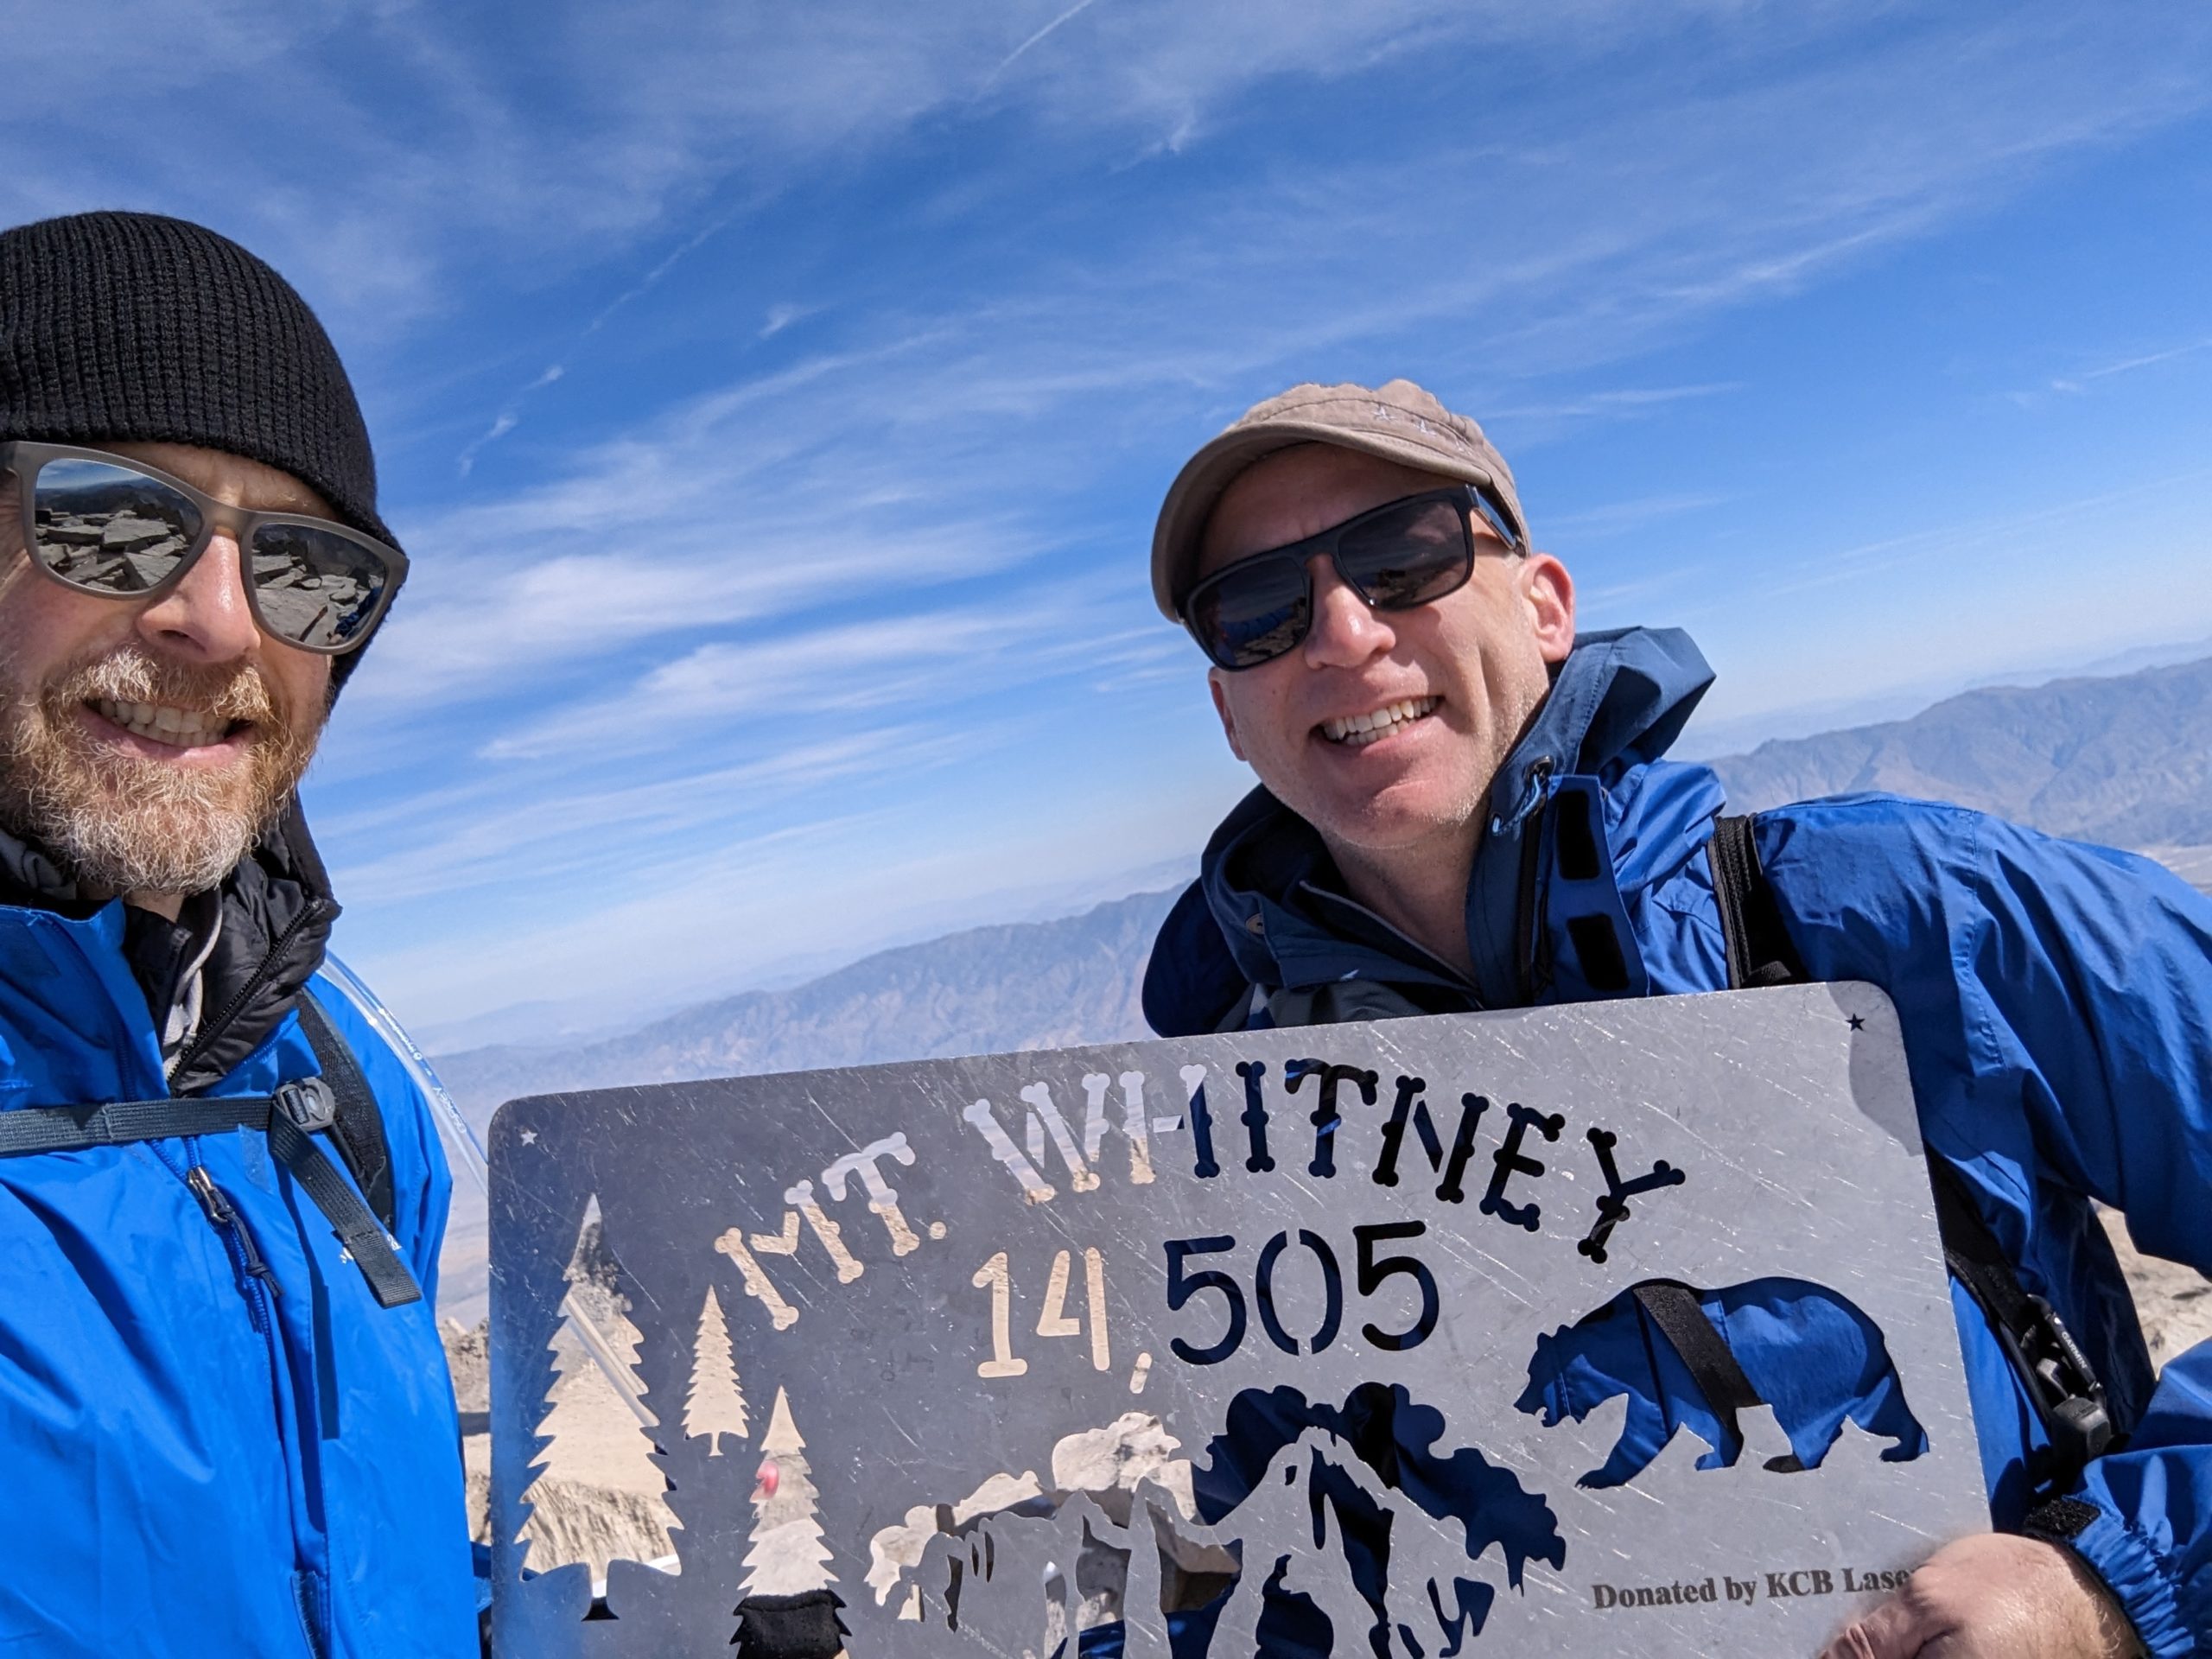 Vaughn and Mat standing on the summit of Mt. Whitney holding a metal sign denoting the elevation of 14,505 feet.